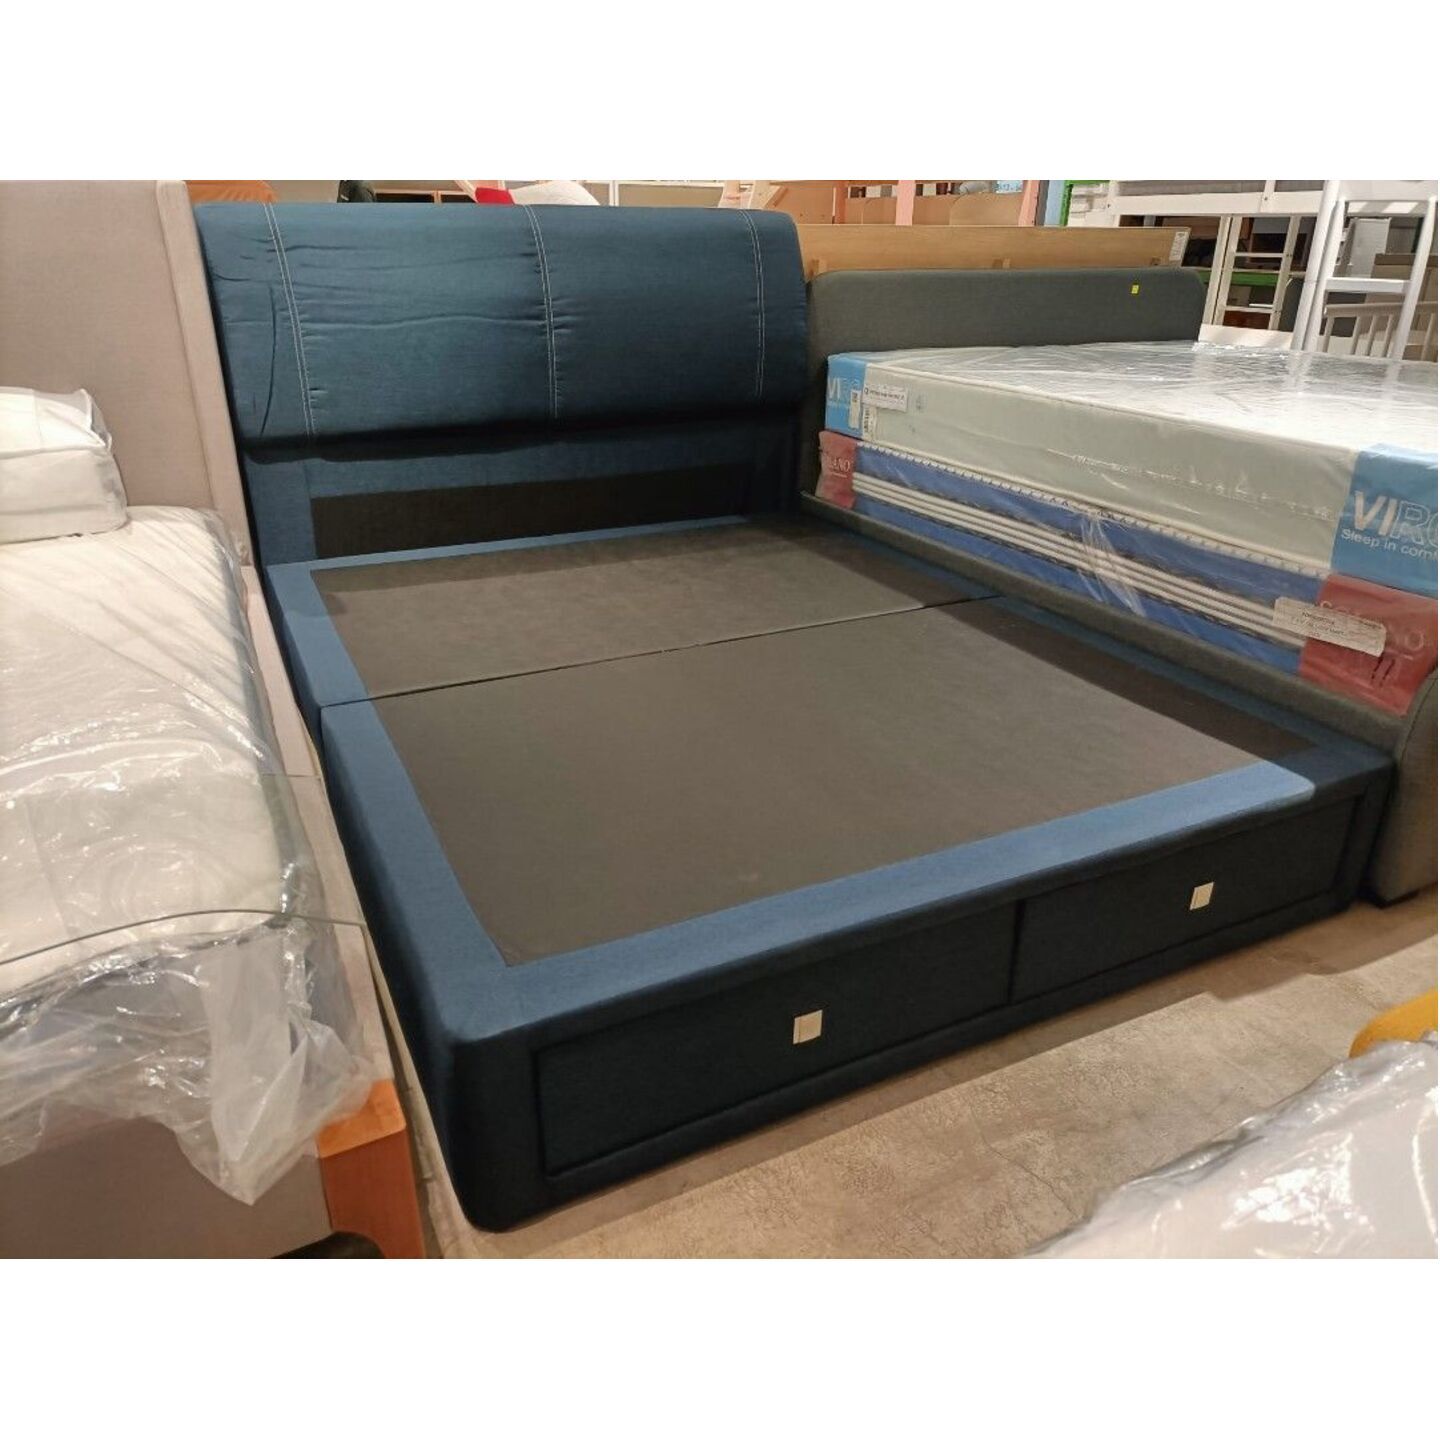 CHANELLE Queen Size Fabric Bedframe with Drawers in MIDNIGHT BLUE